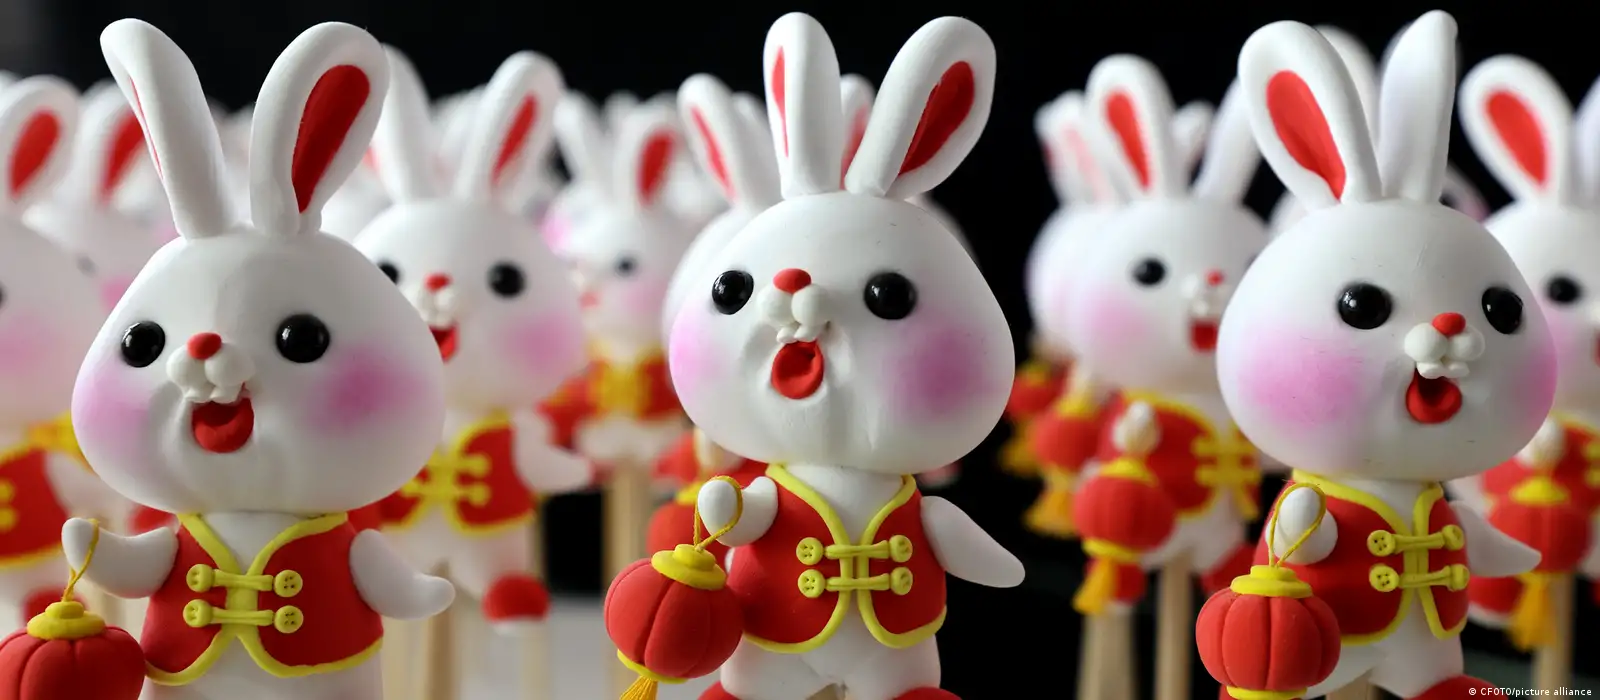 The Meaning Behind the Year of the Rabbit – Lunar New Year 2023